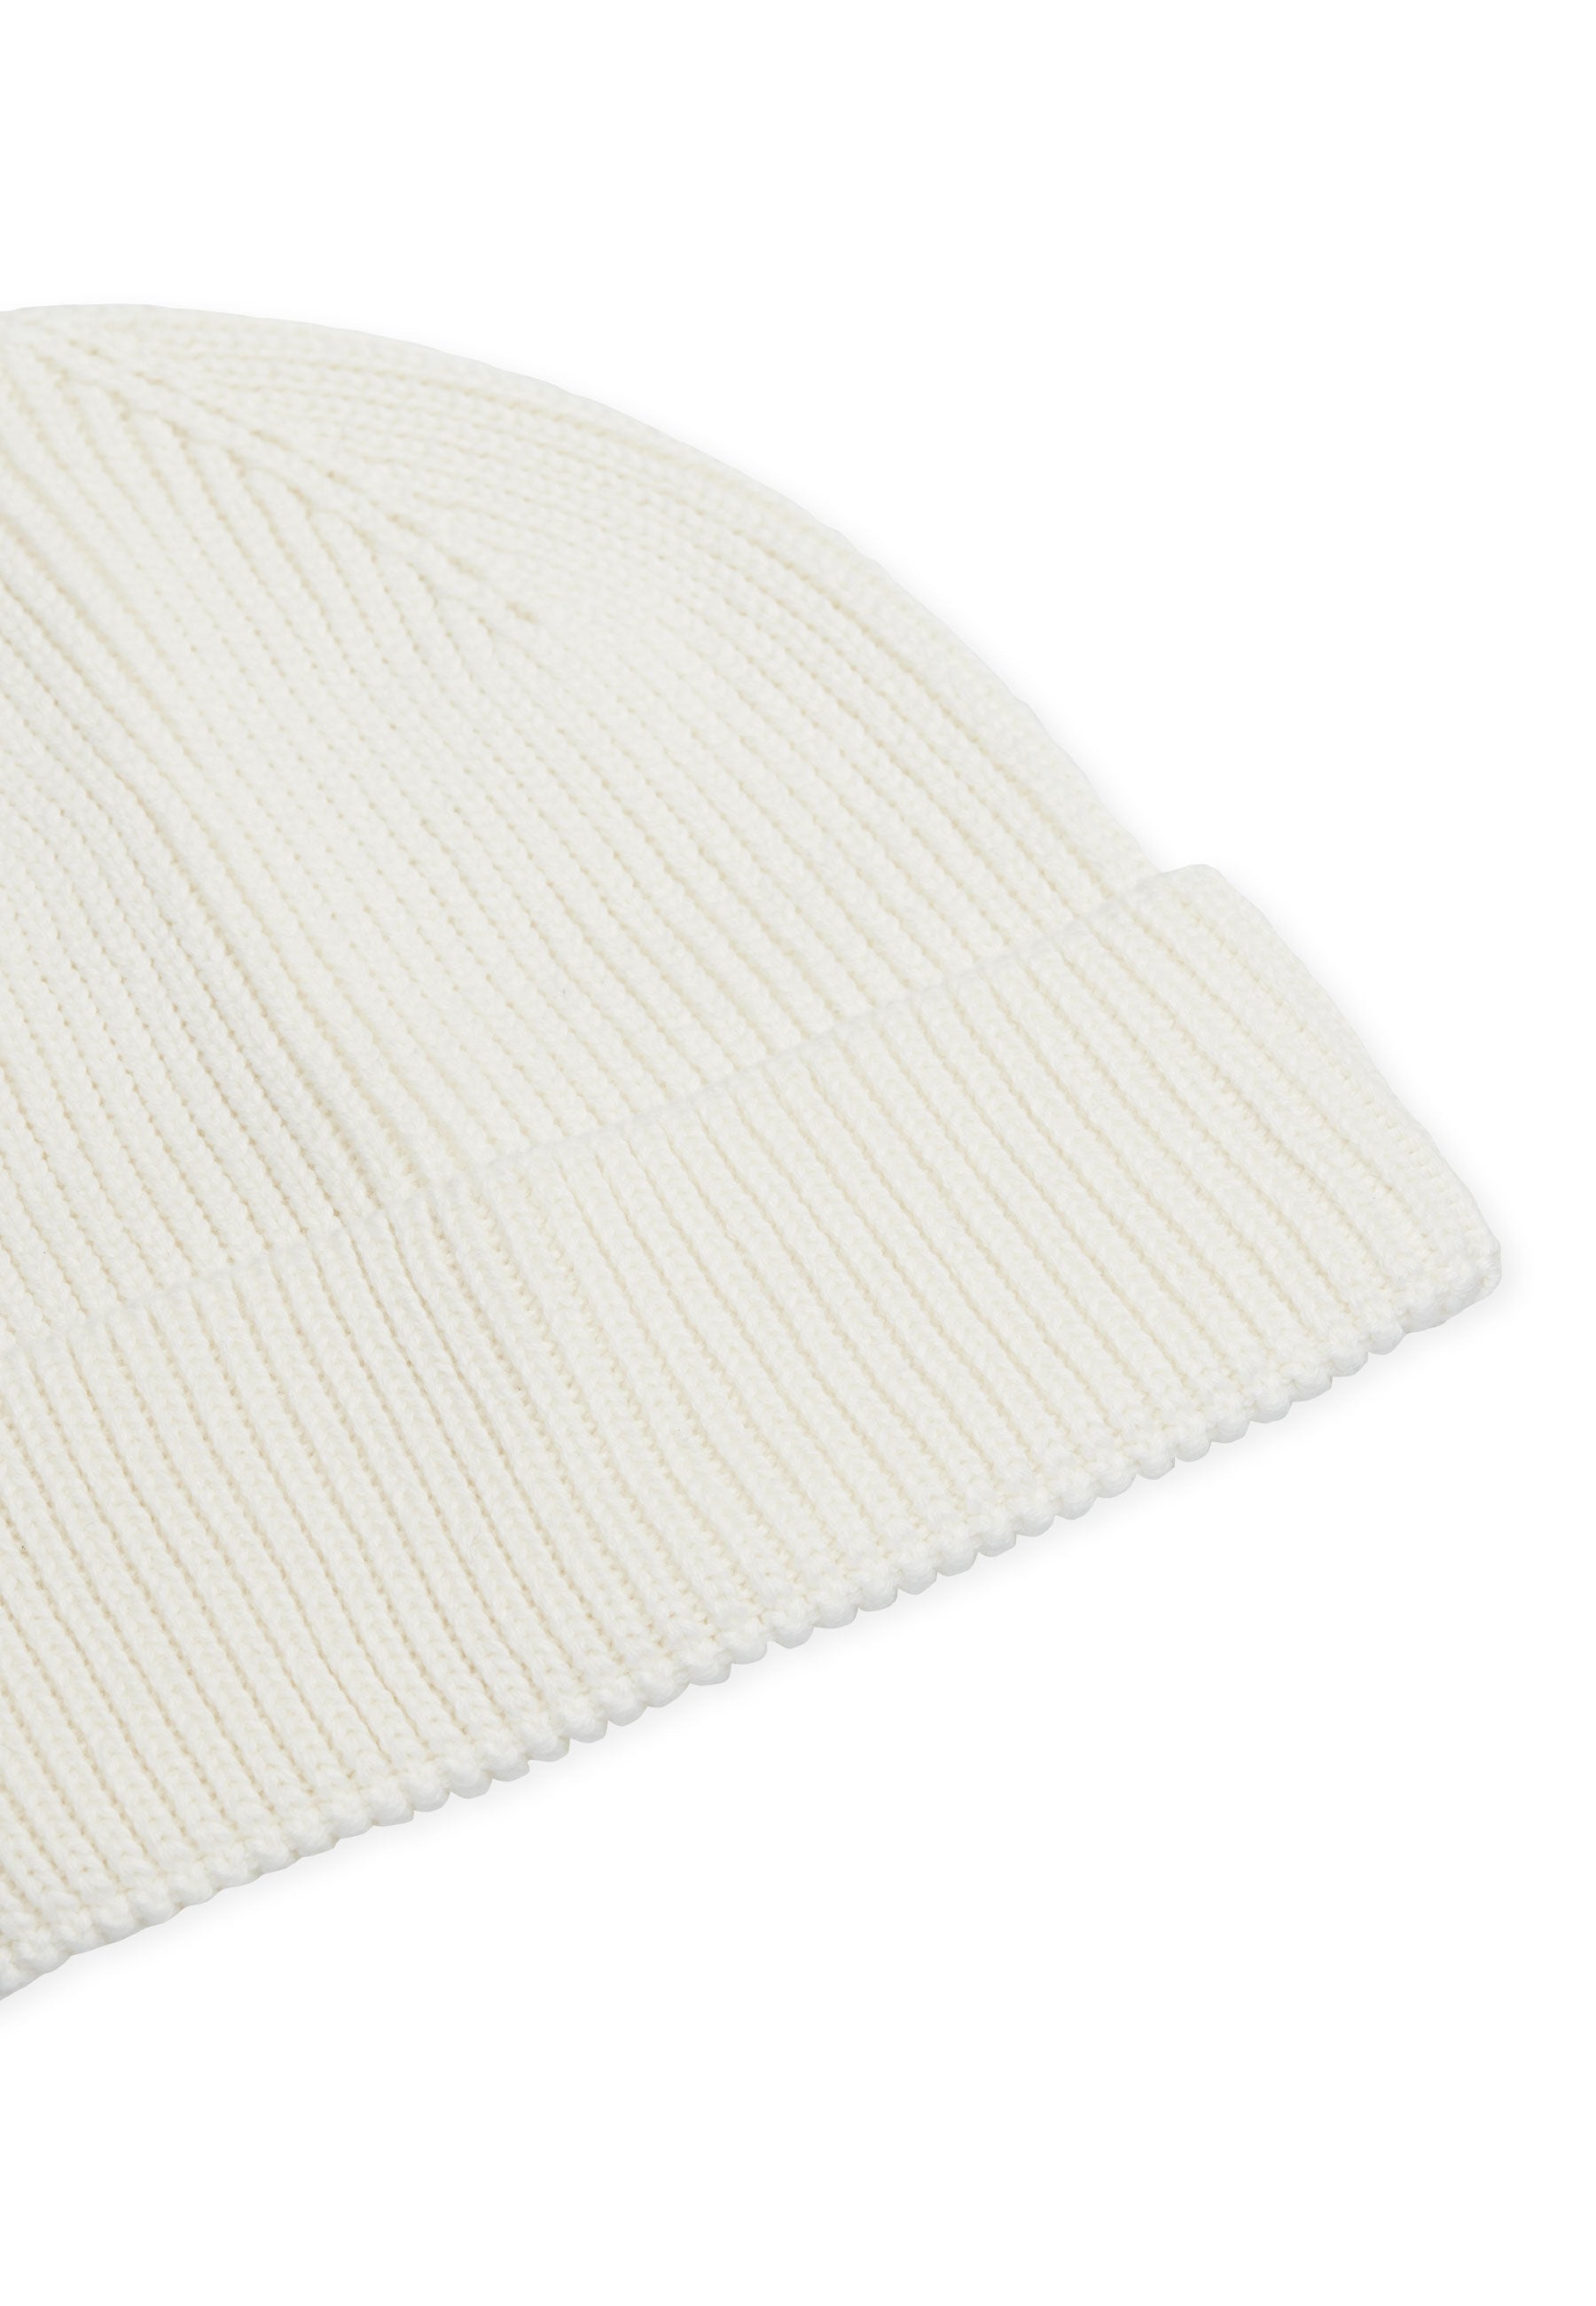 WMHENRY BEANIE in Snow White